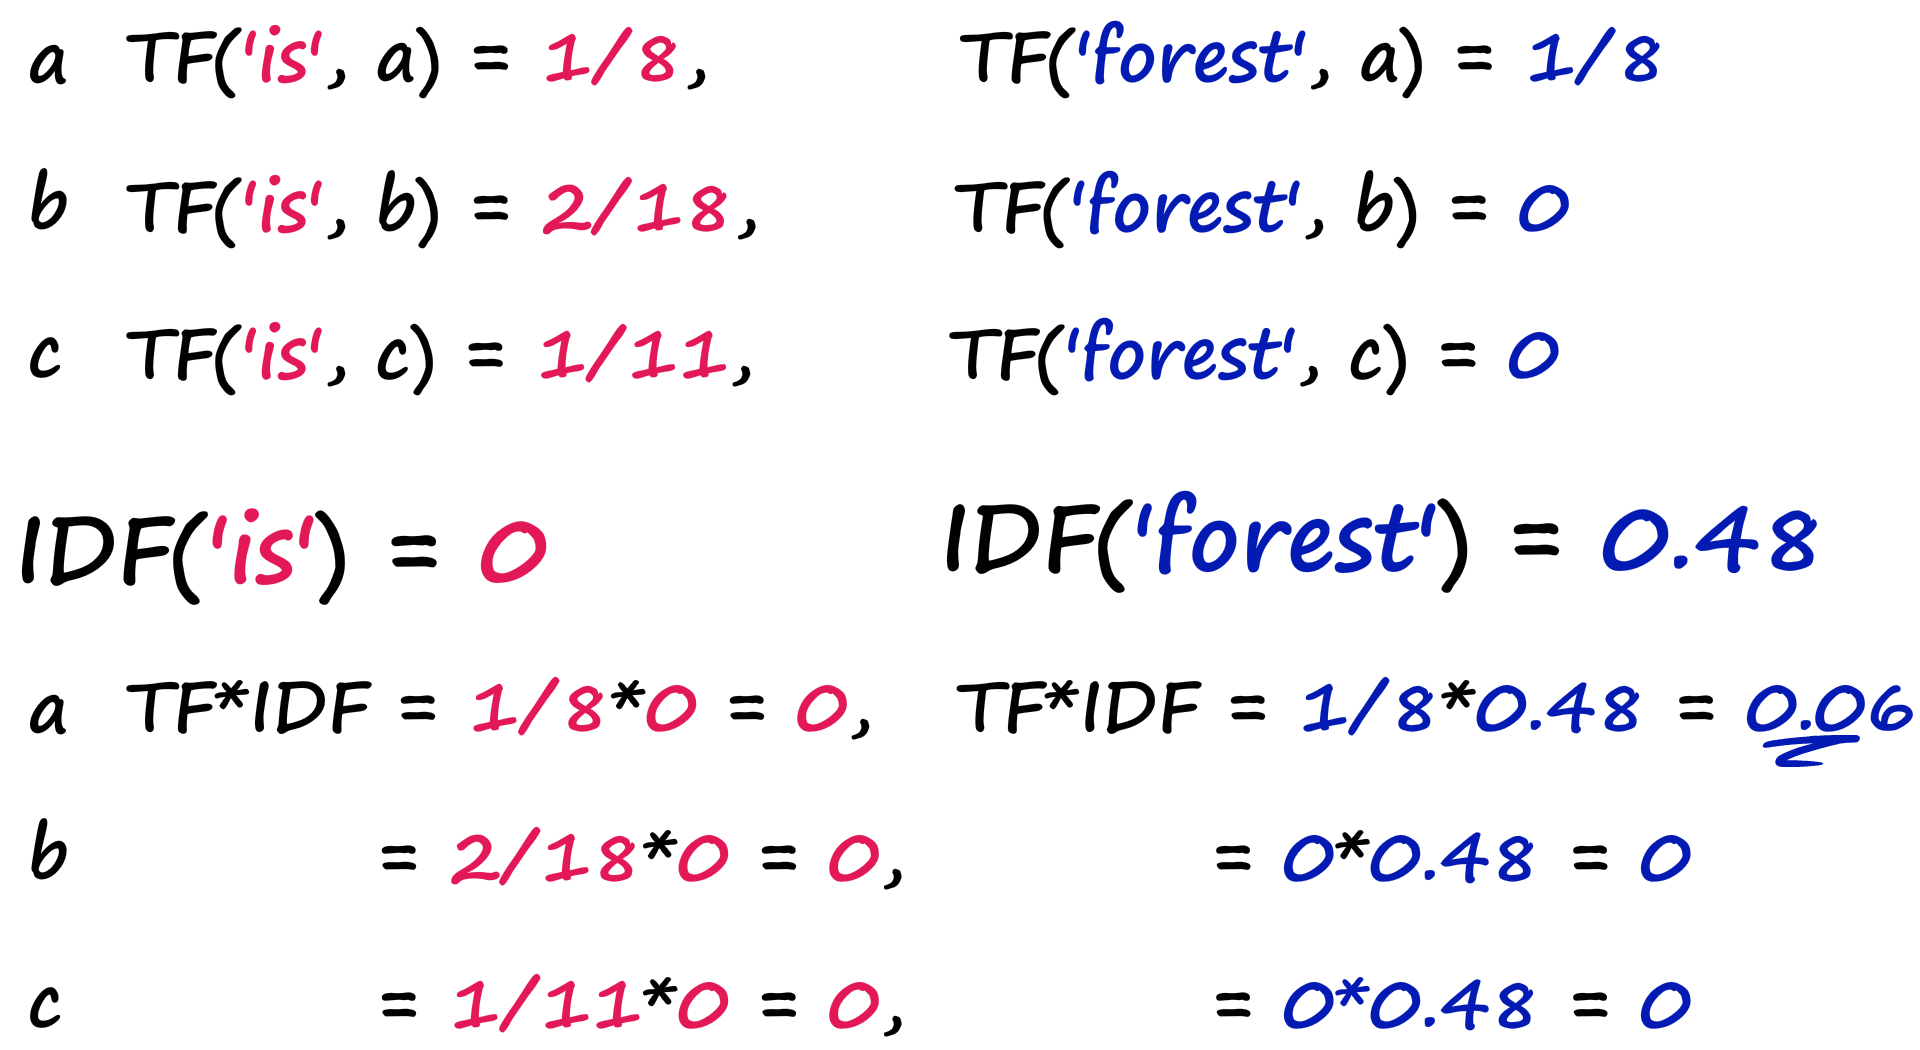 We calculate the TF(&lsquo;is&rsquo;, D) and TF(&lsquo;forest&rsquo;, D) scores for docs a, b, and c.